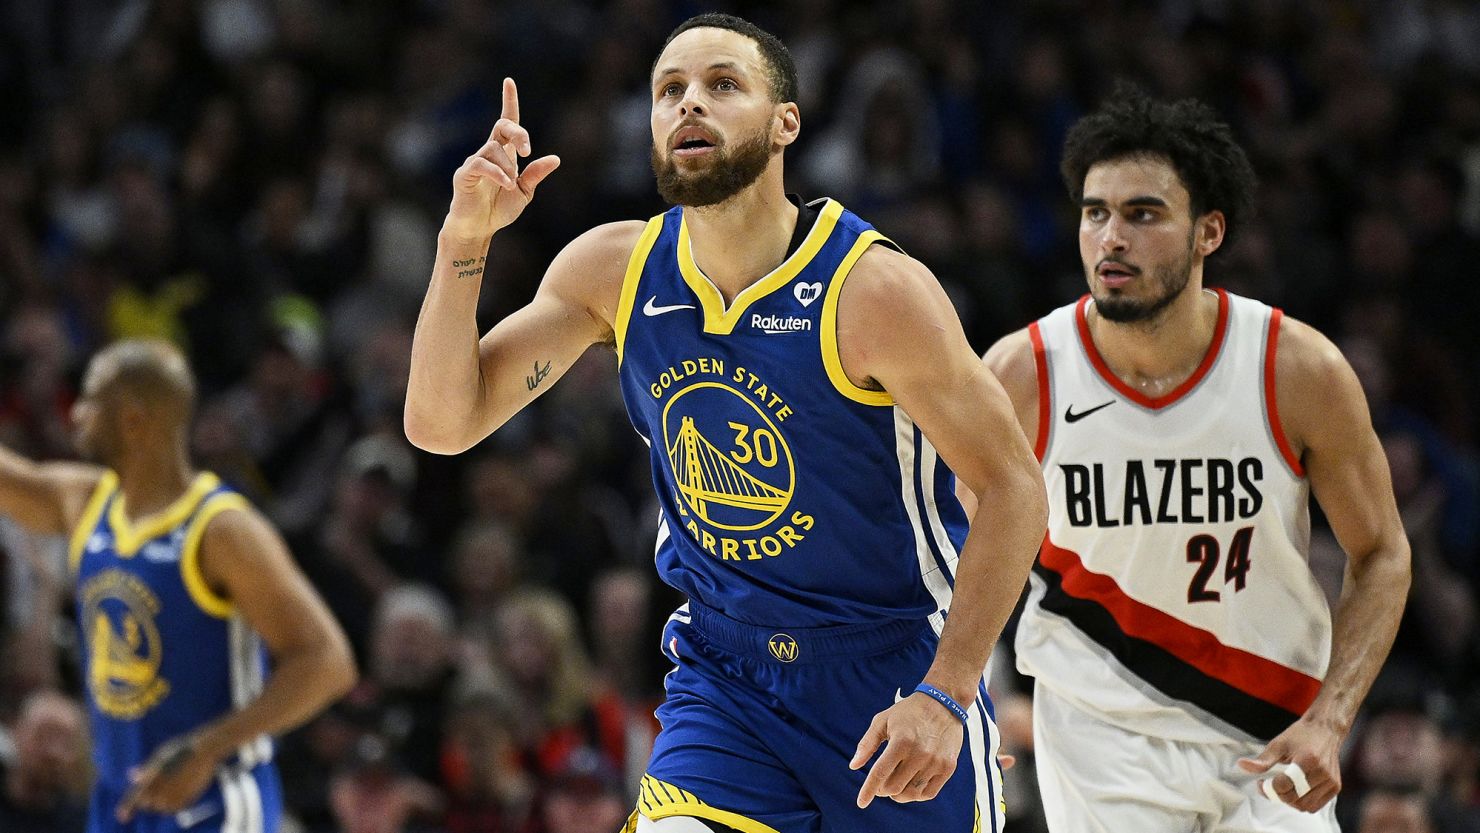 Steph Curry led the Golden State Warriors to a huge win over the Portland Trail Blazers.